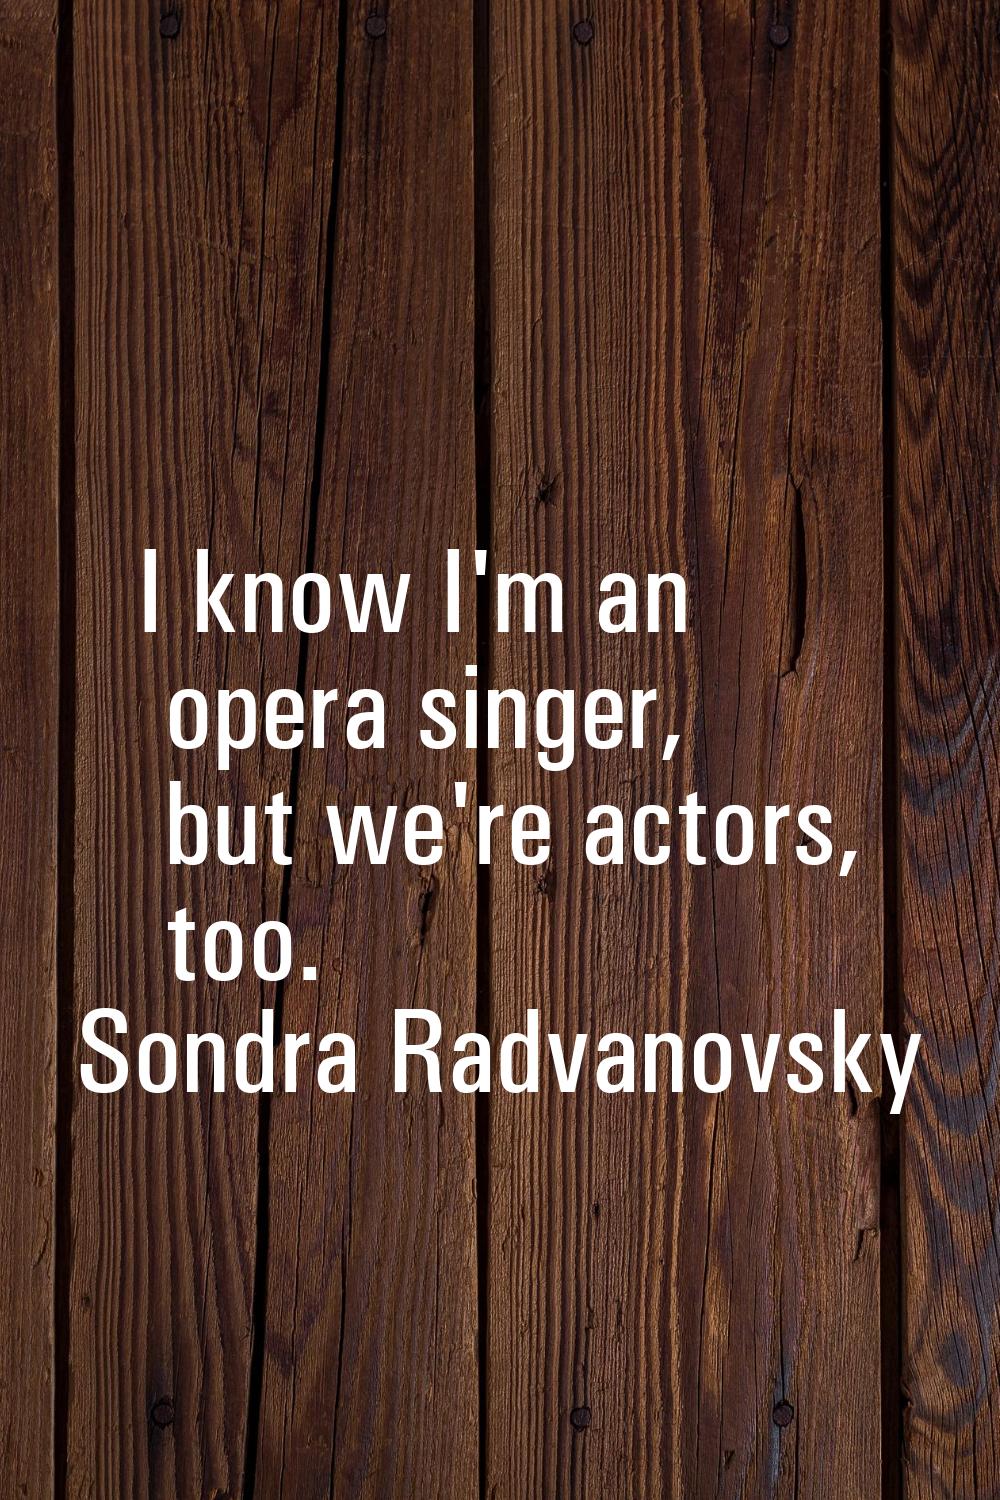 I know I'm an opera singer, but we're actors, too.